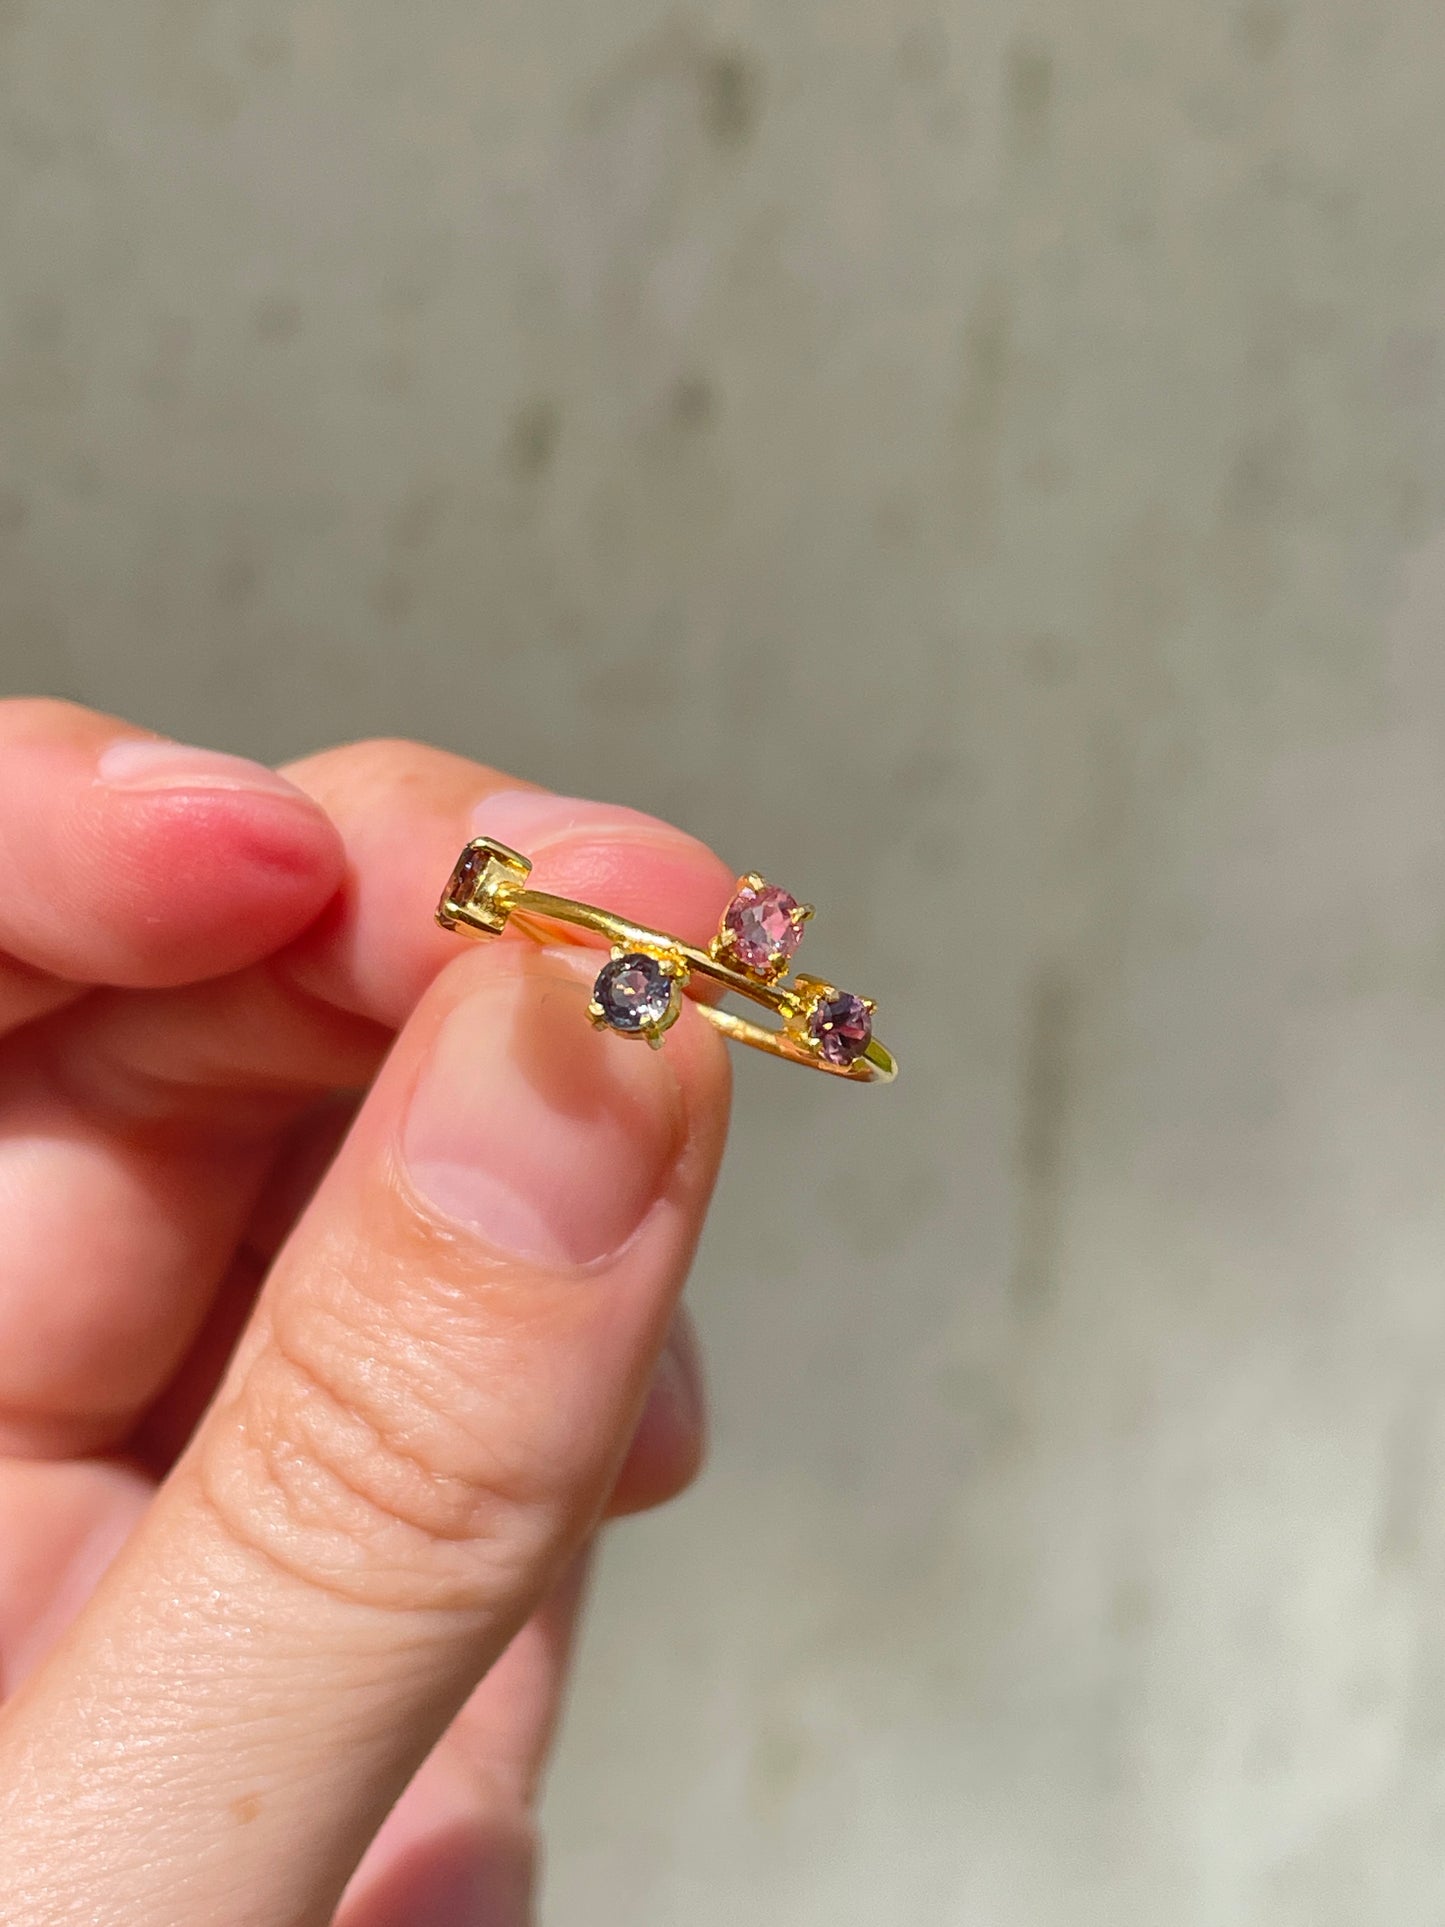 Galaxy Ring Gold with Pink Tourmalines, Sapphires & Garnets  - size 7.5